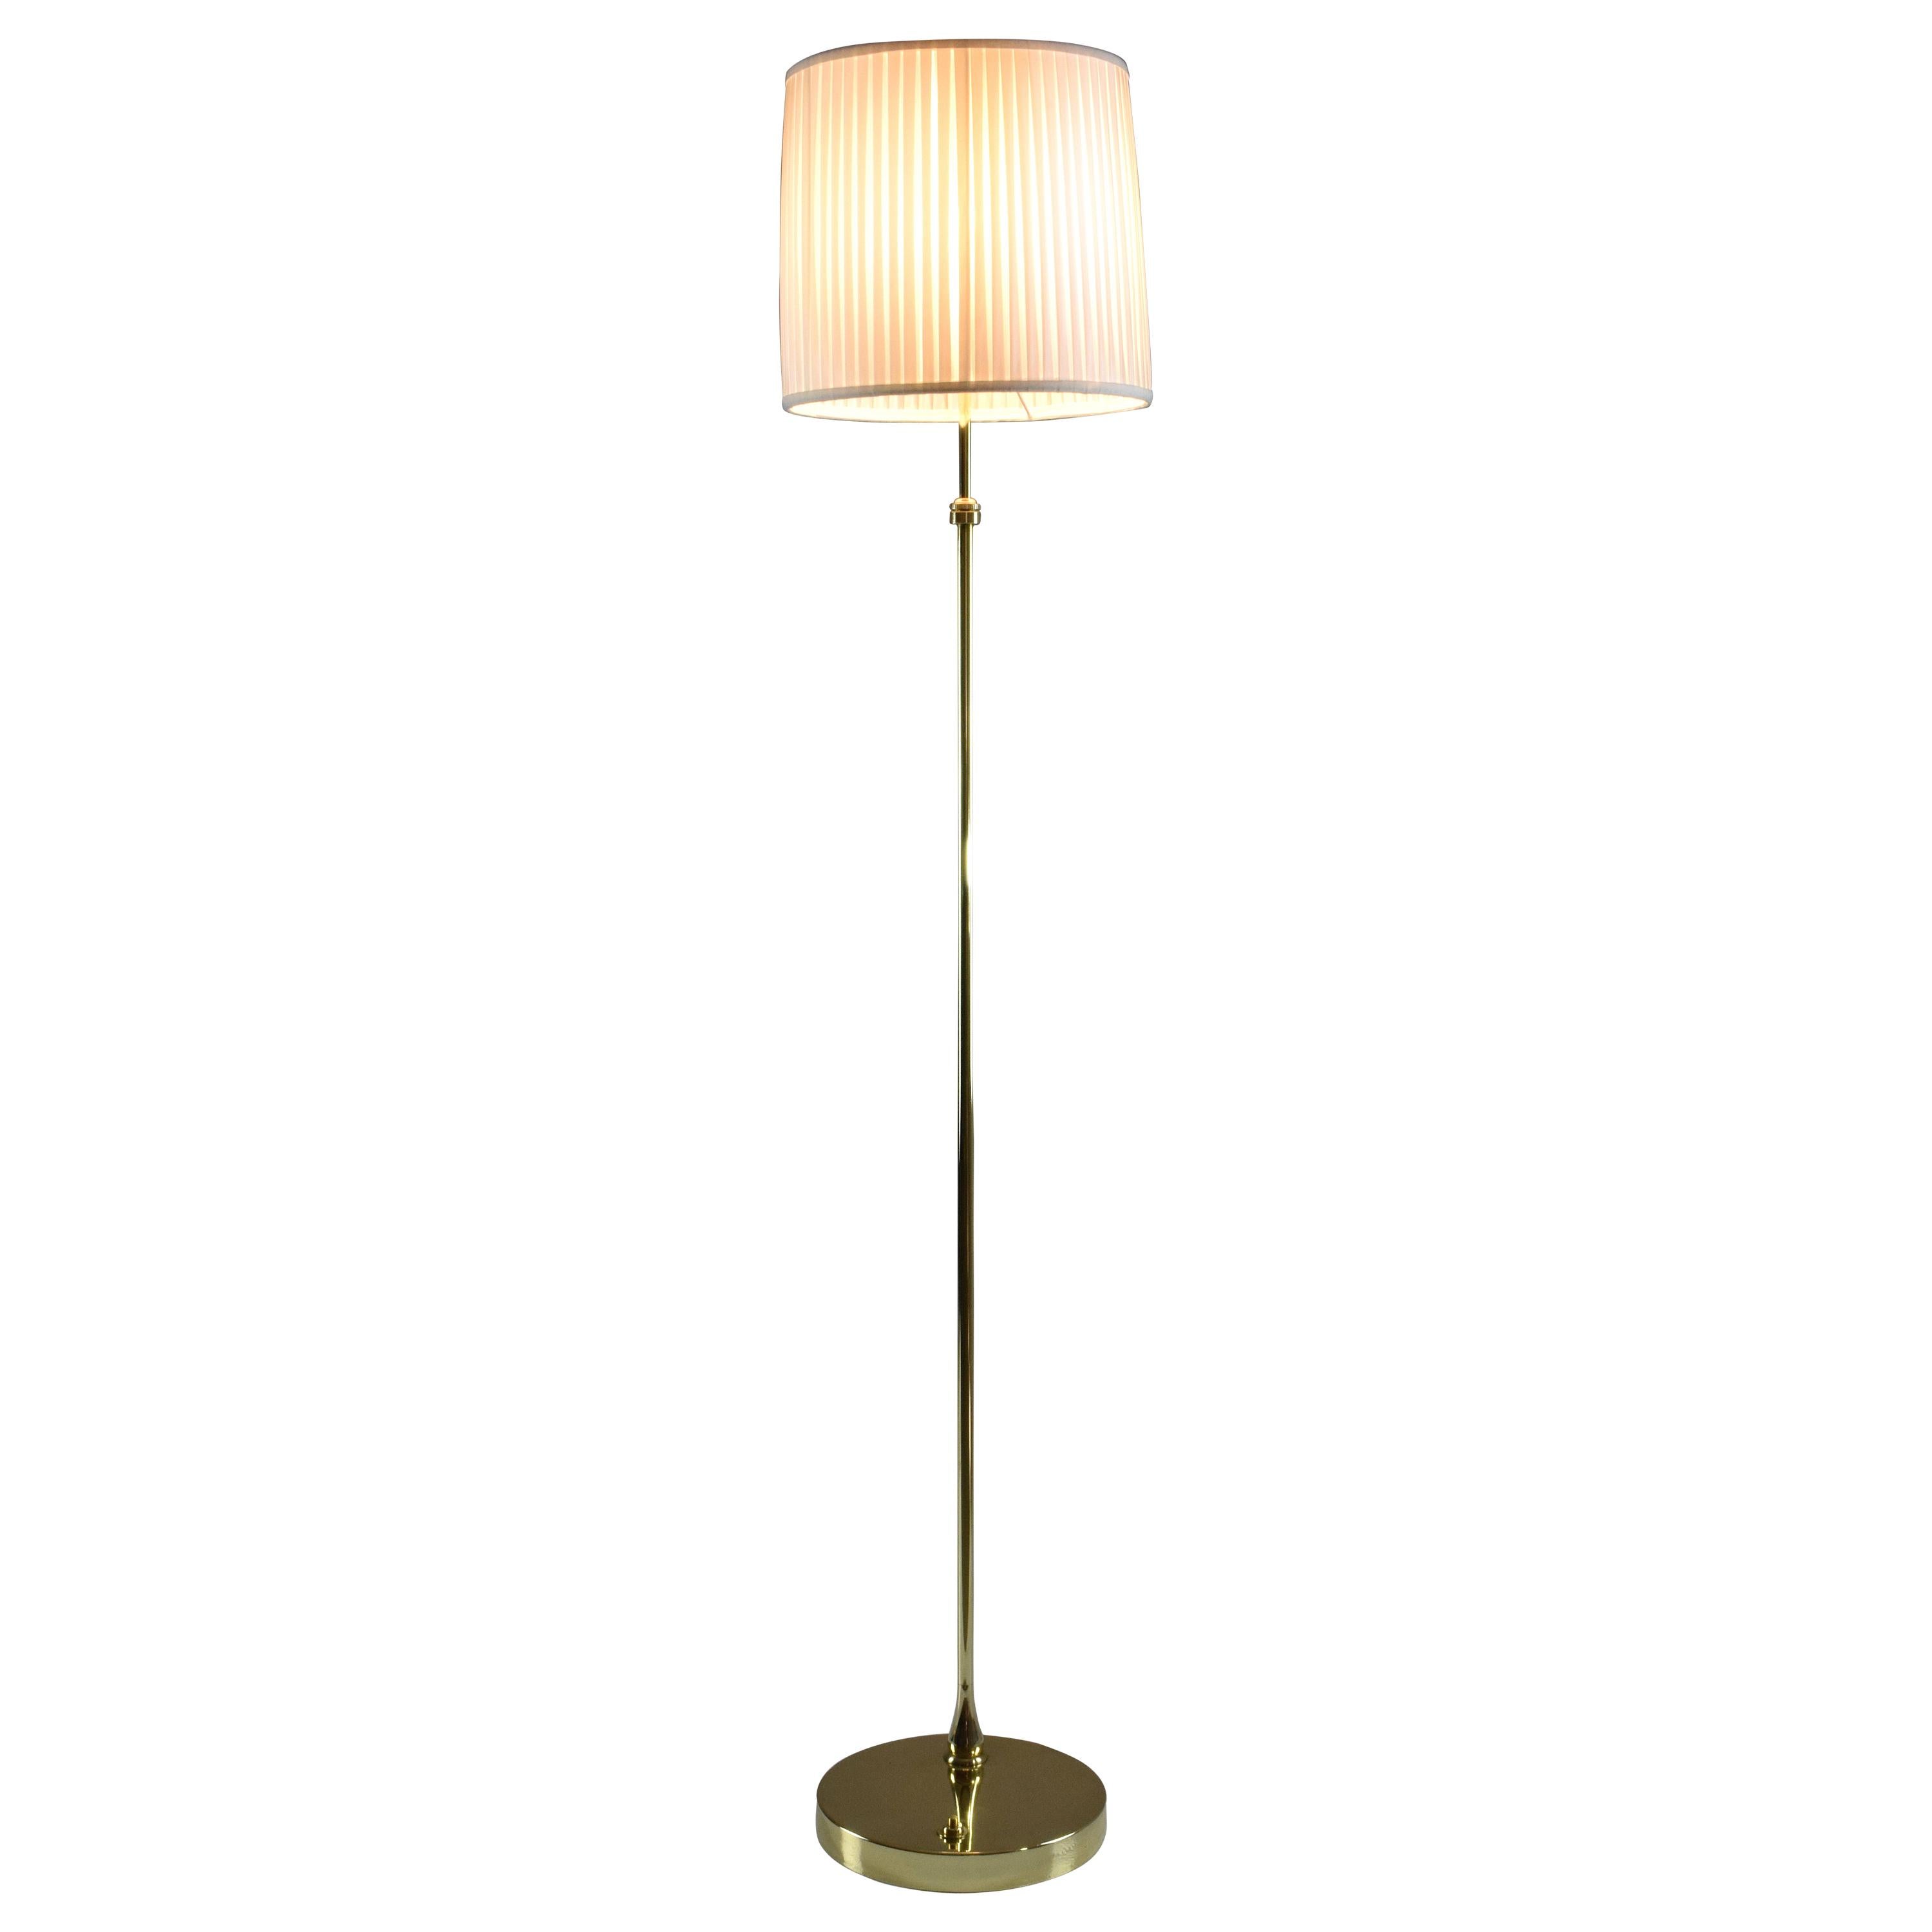 Equilibrium-I Contemporary Handcrafted Adjustable Brass Floor Lamp